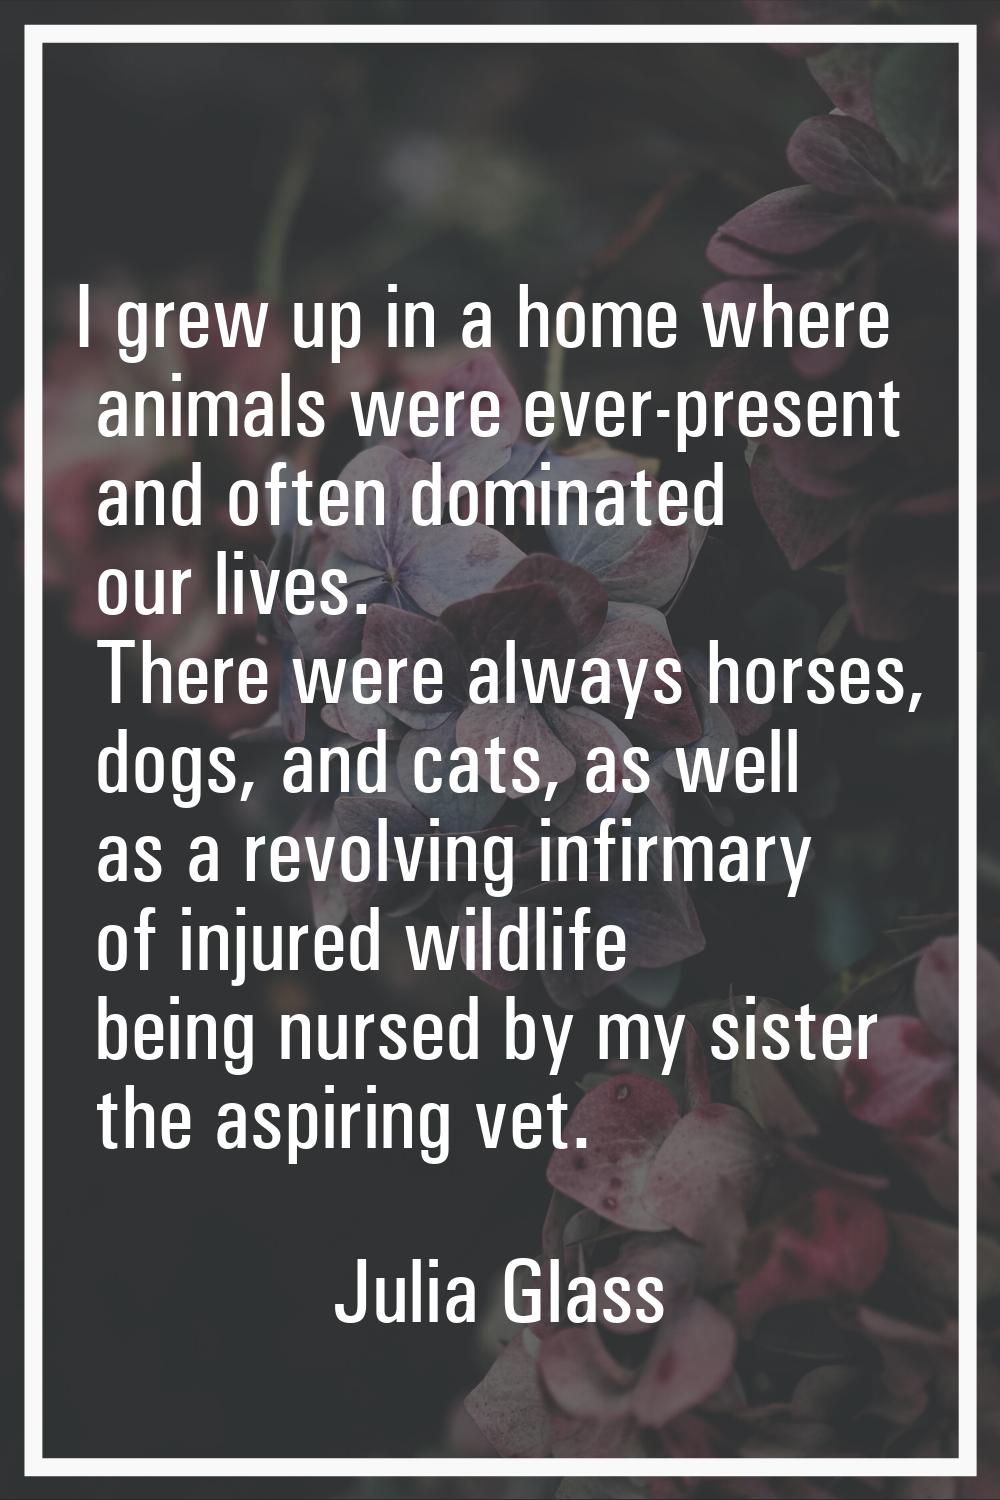 I grew up in a home where animals were ever-present and often dominated our lives. There were alway